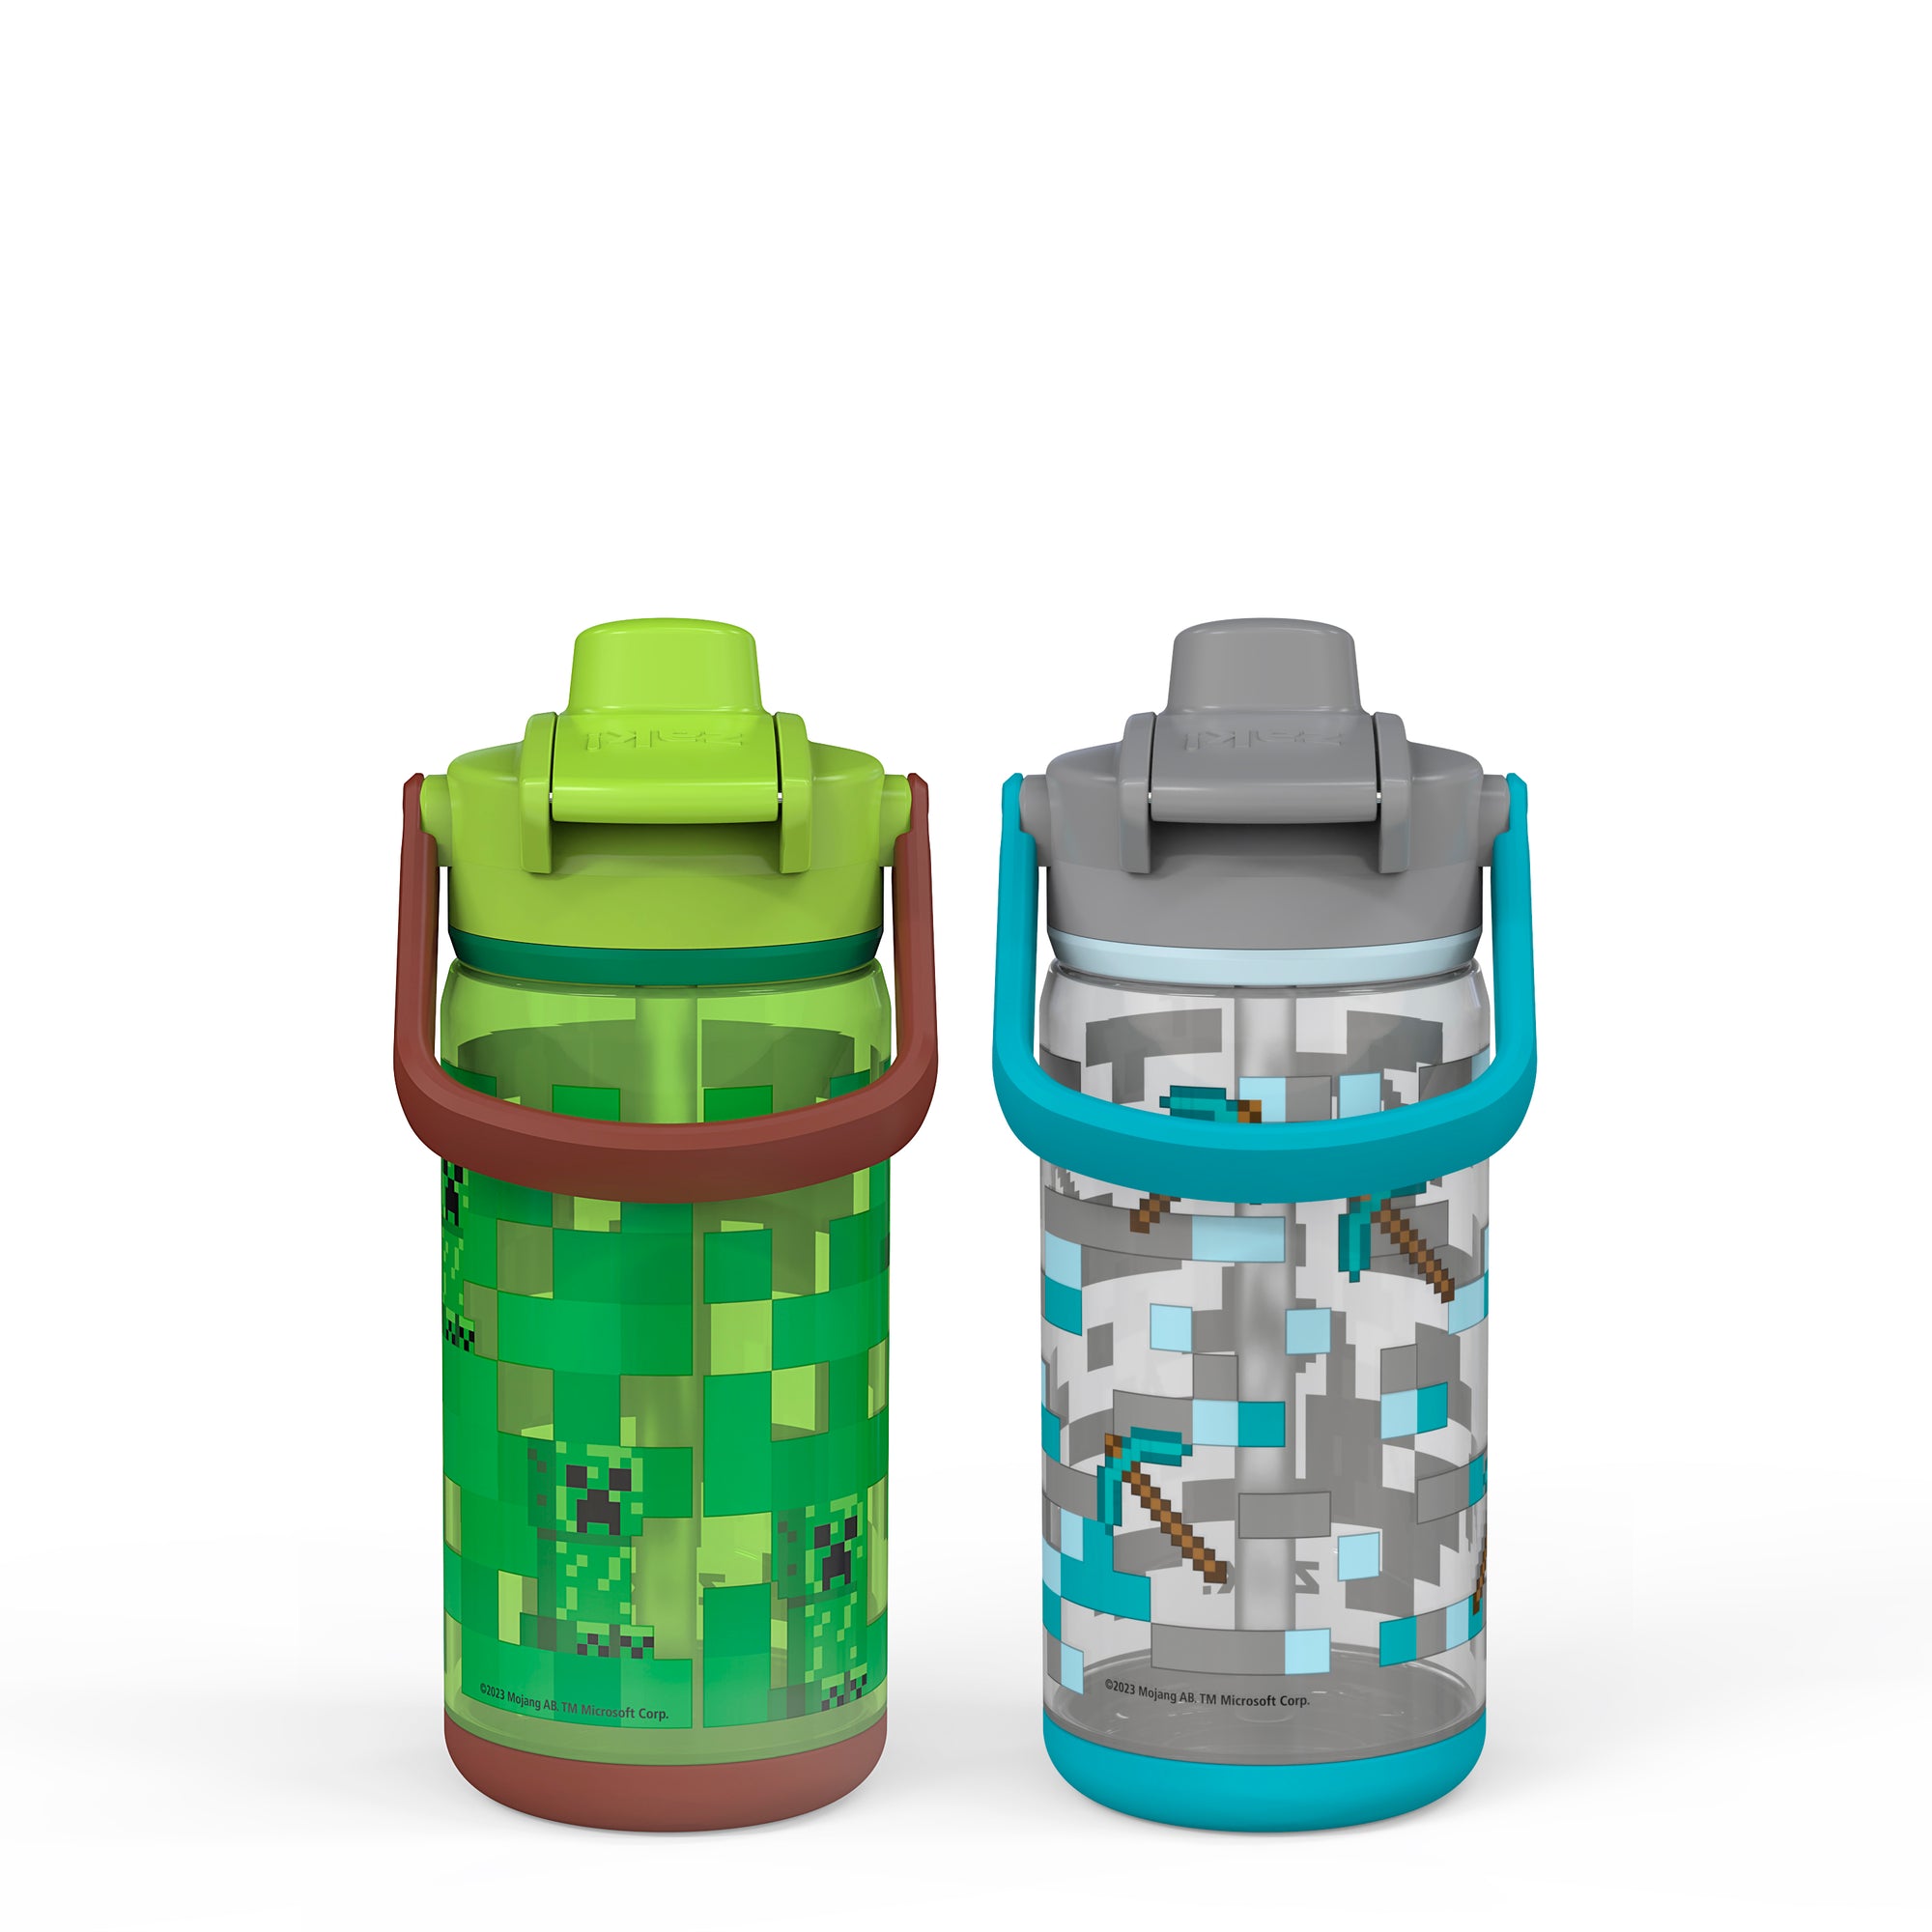 Minecraft Creeper Beacon 2-Piece Kids Water Bottle Set with Covered Spout, 16 Ounces